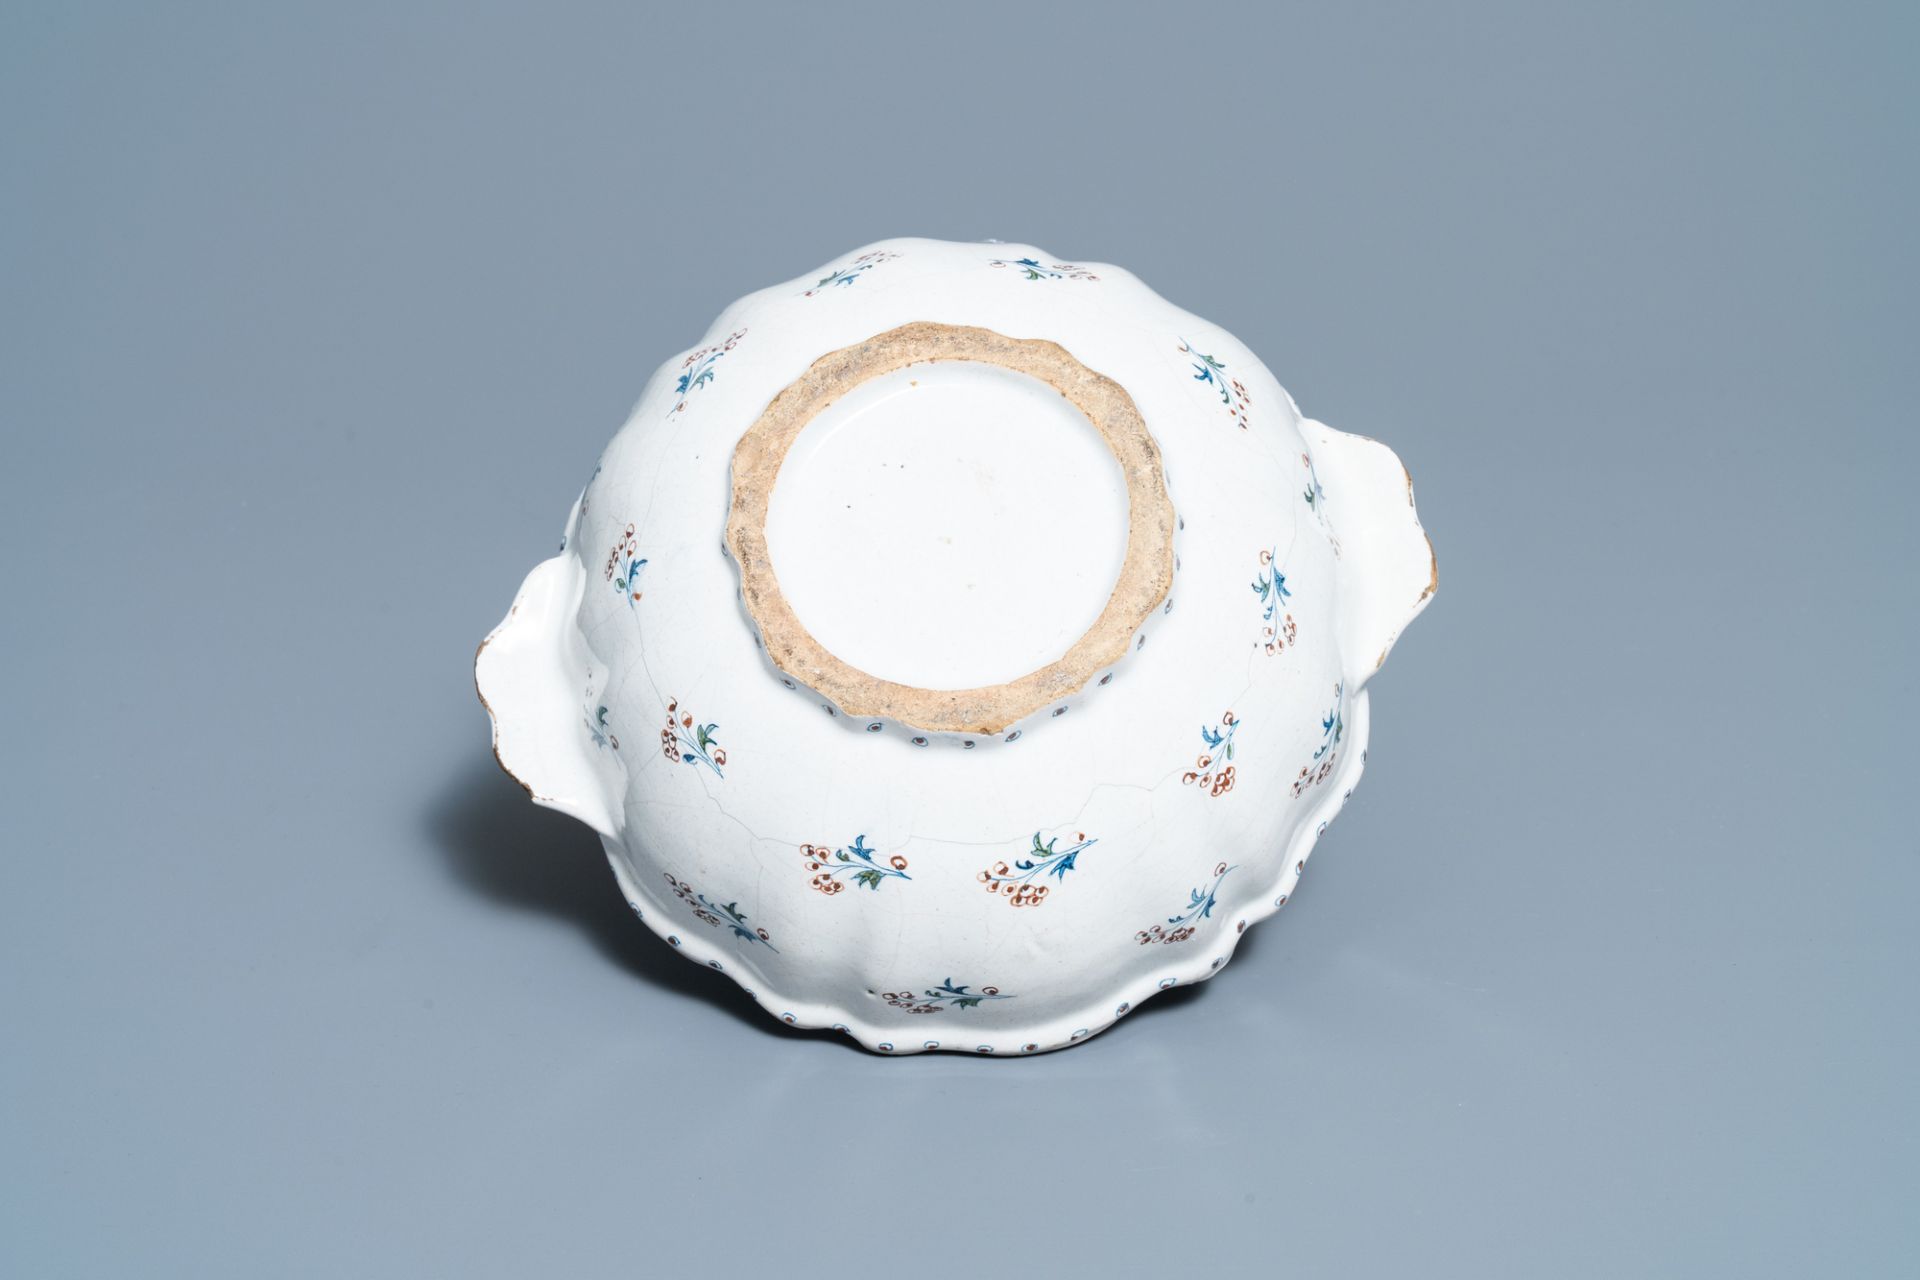 A Brussels faience basin with 'a la haie fleurie' design, 18th C. - Image 7 of 7